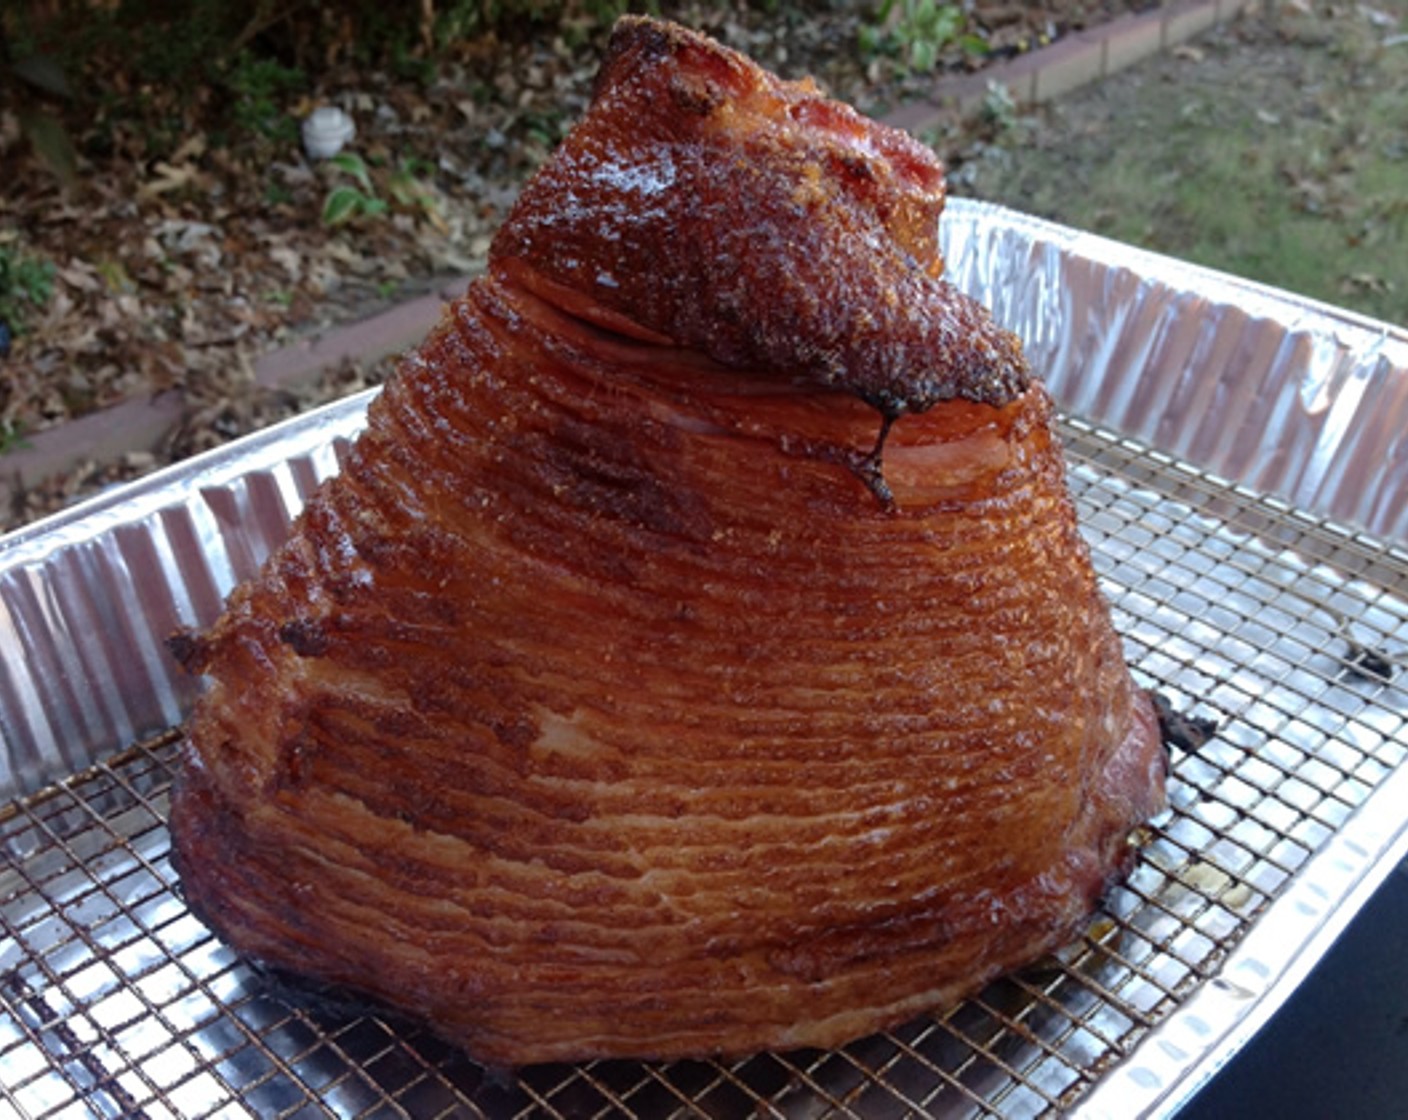 step 7 You can tell when the ham is ready because the slices will start to separate slightly and the outside will have that caramelized look. When it reaches this point, remove the ham from the smoker and loosely tent with aluminum foil.